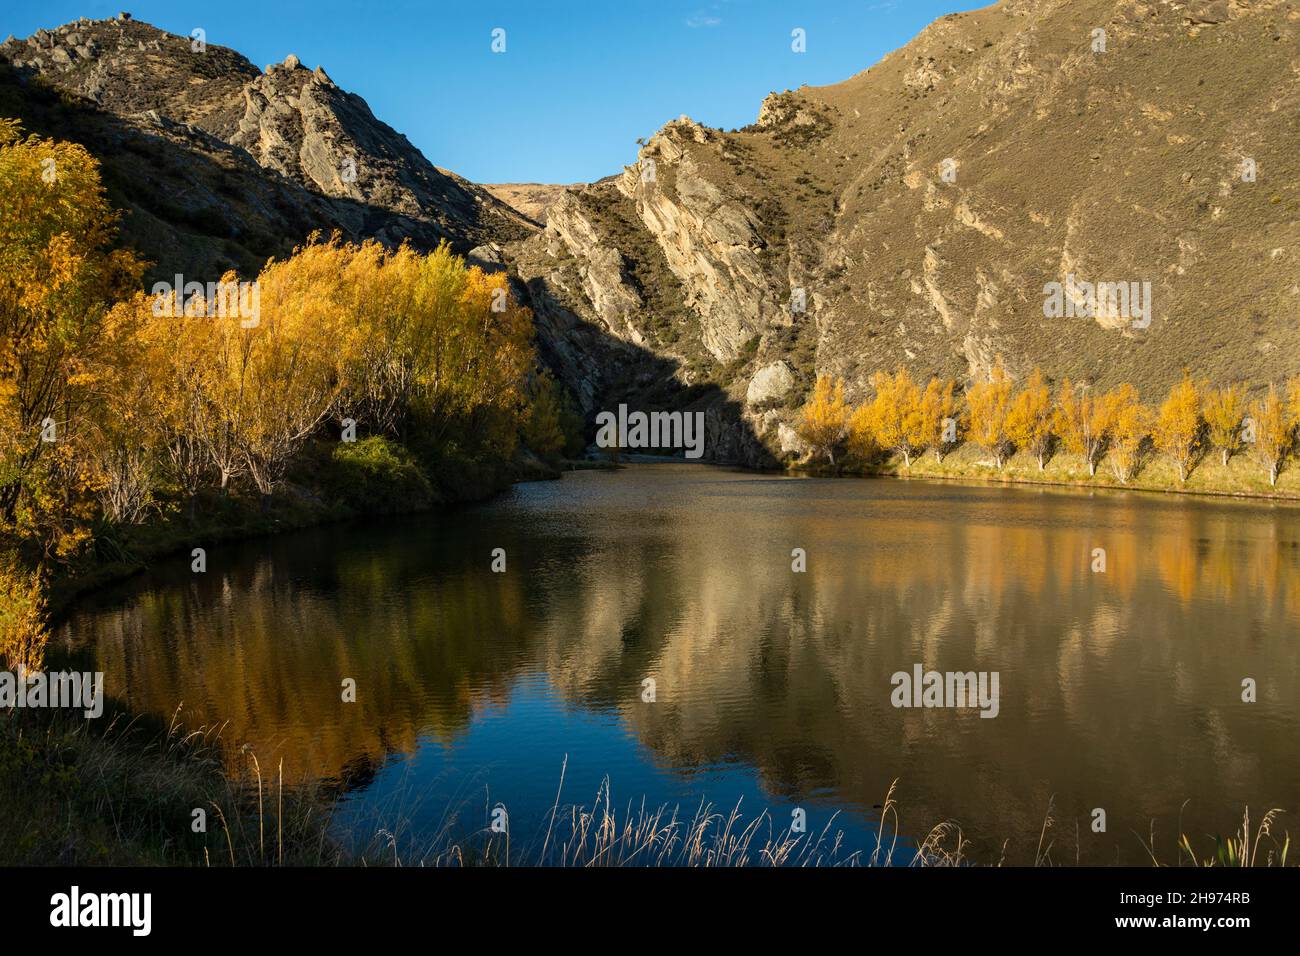 Reflection of yellow autumn trees in a small pond, Central Otago, South Island. Stock Photo